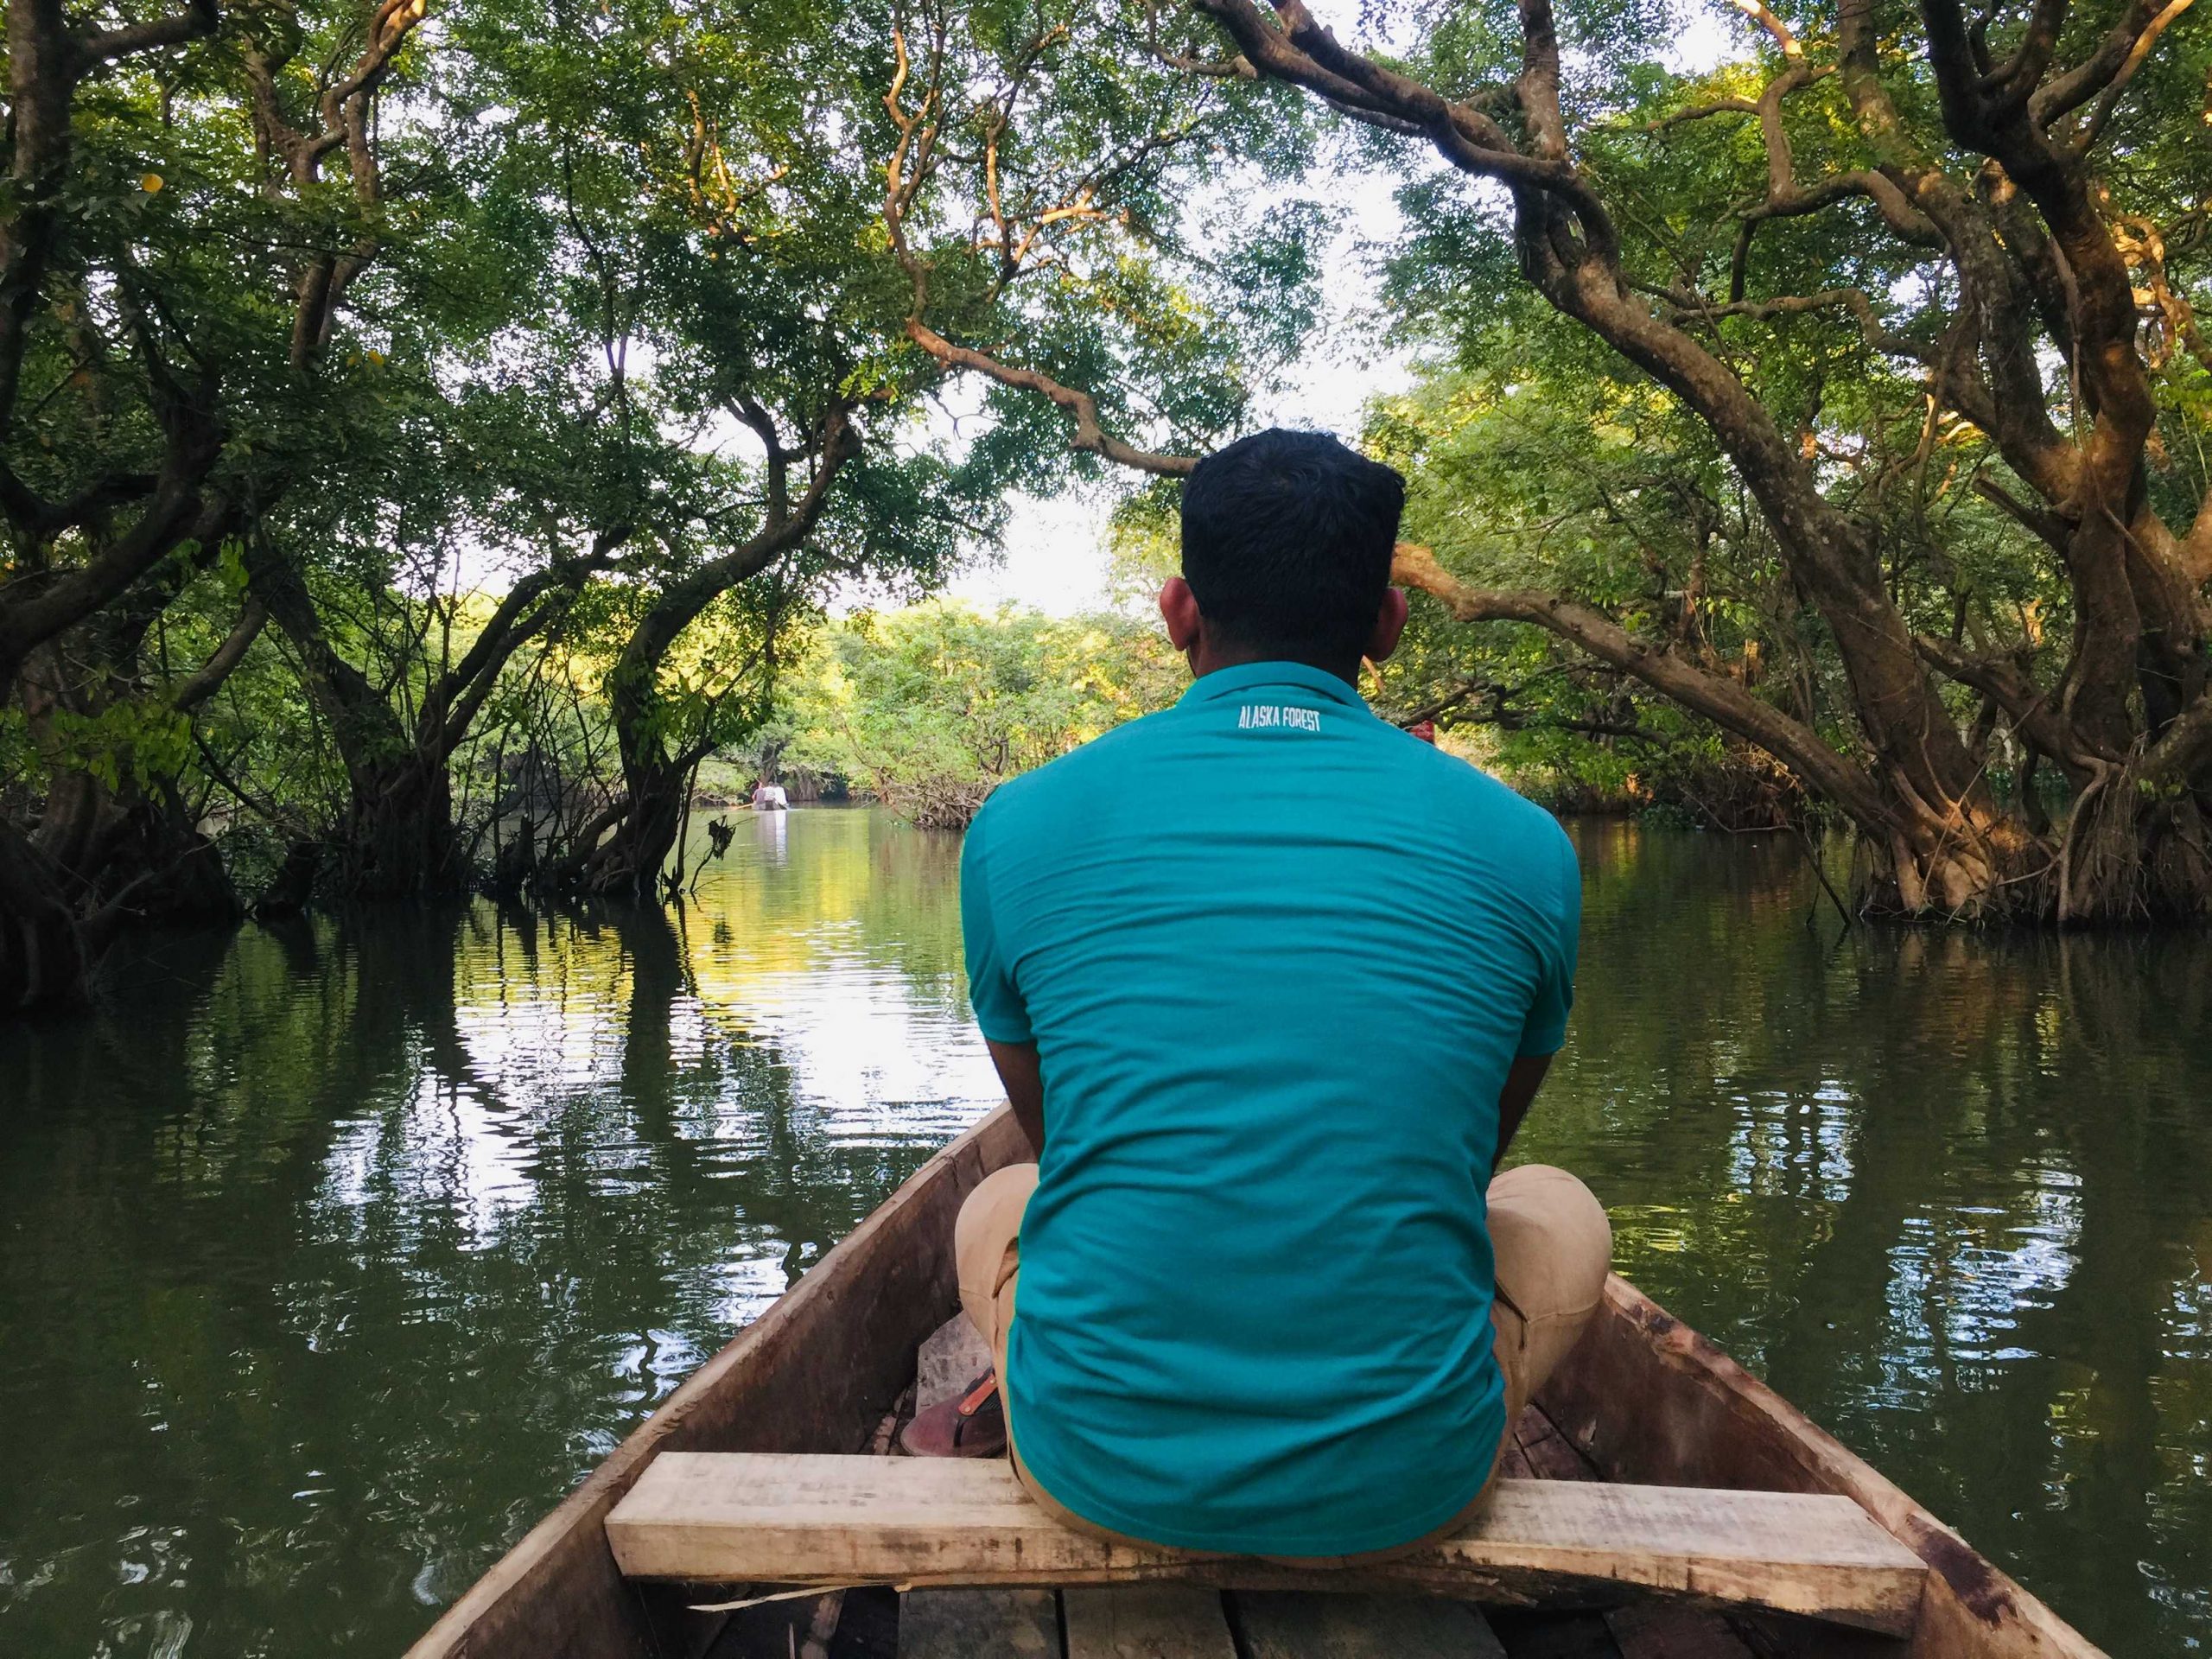 A man is enjoying the natural beauty of Ratargul Swamp Forest